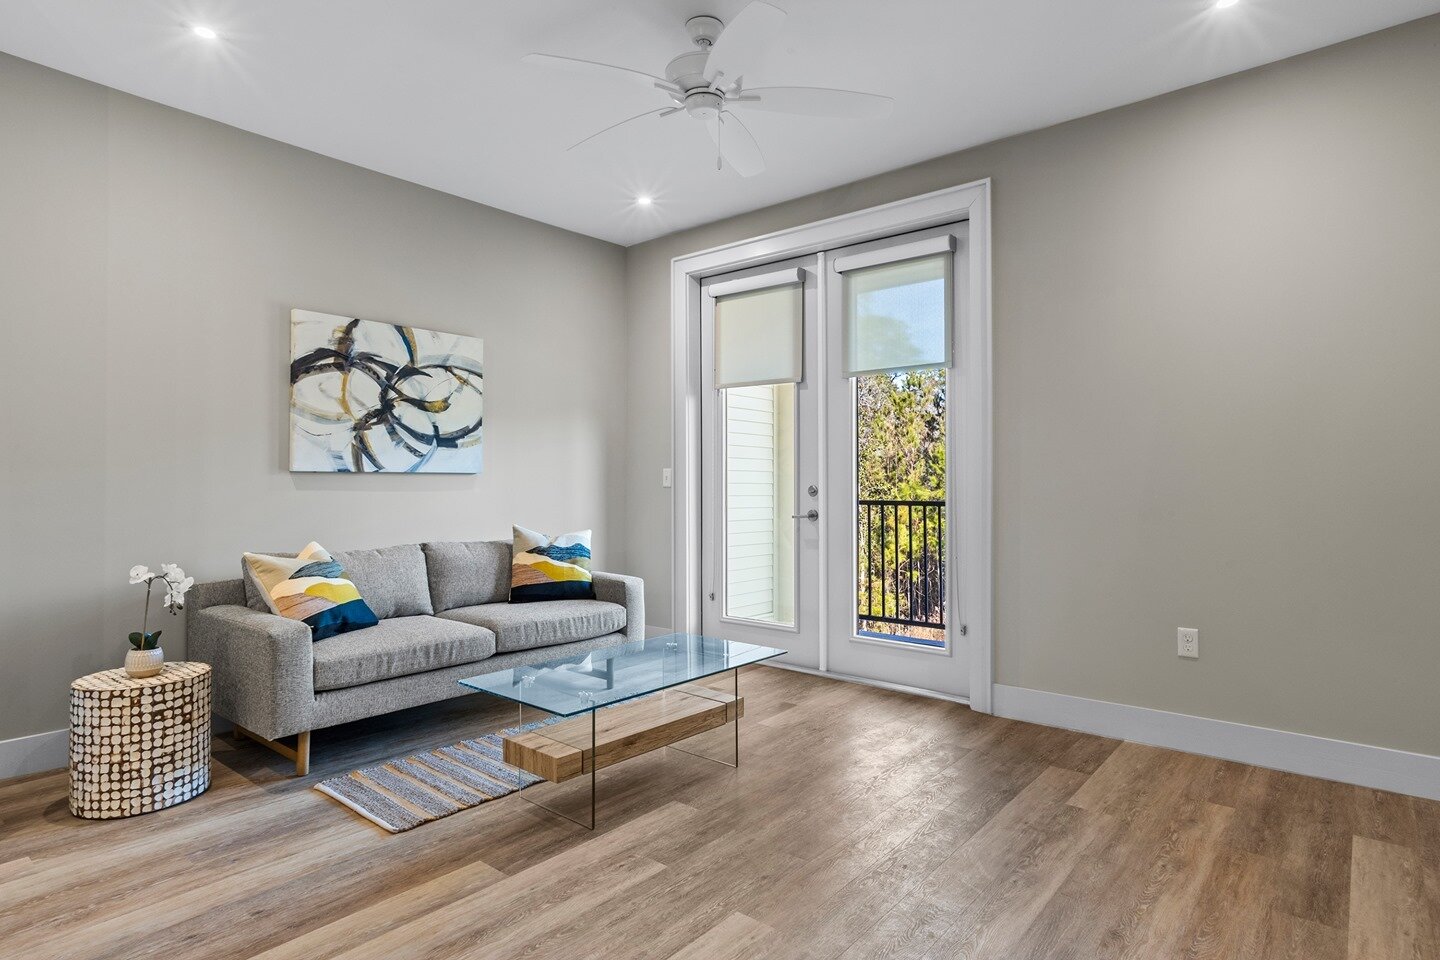 We are loving those bright pops of color in the newly furnished condo at The Inlet! 💛

Now available for purchase, this one bed, one bath has a beautiful view of the nature preserve and Fort Bayou as well as access to all of the amazing community am